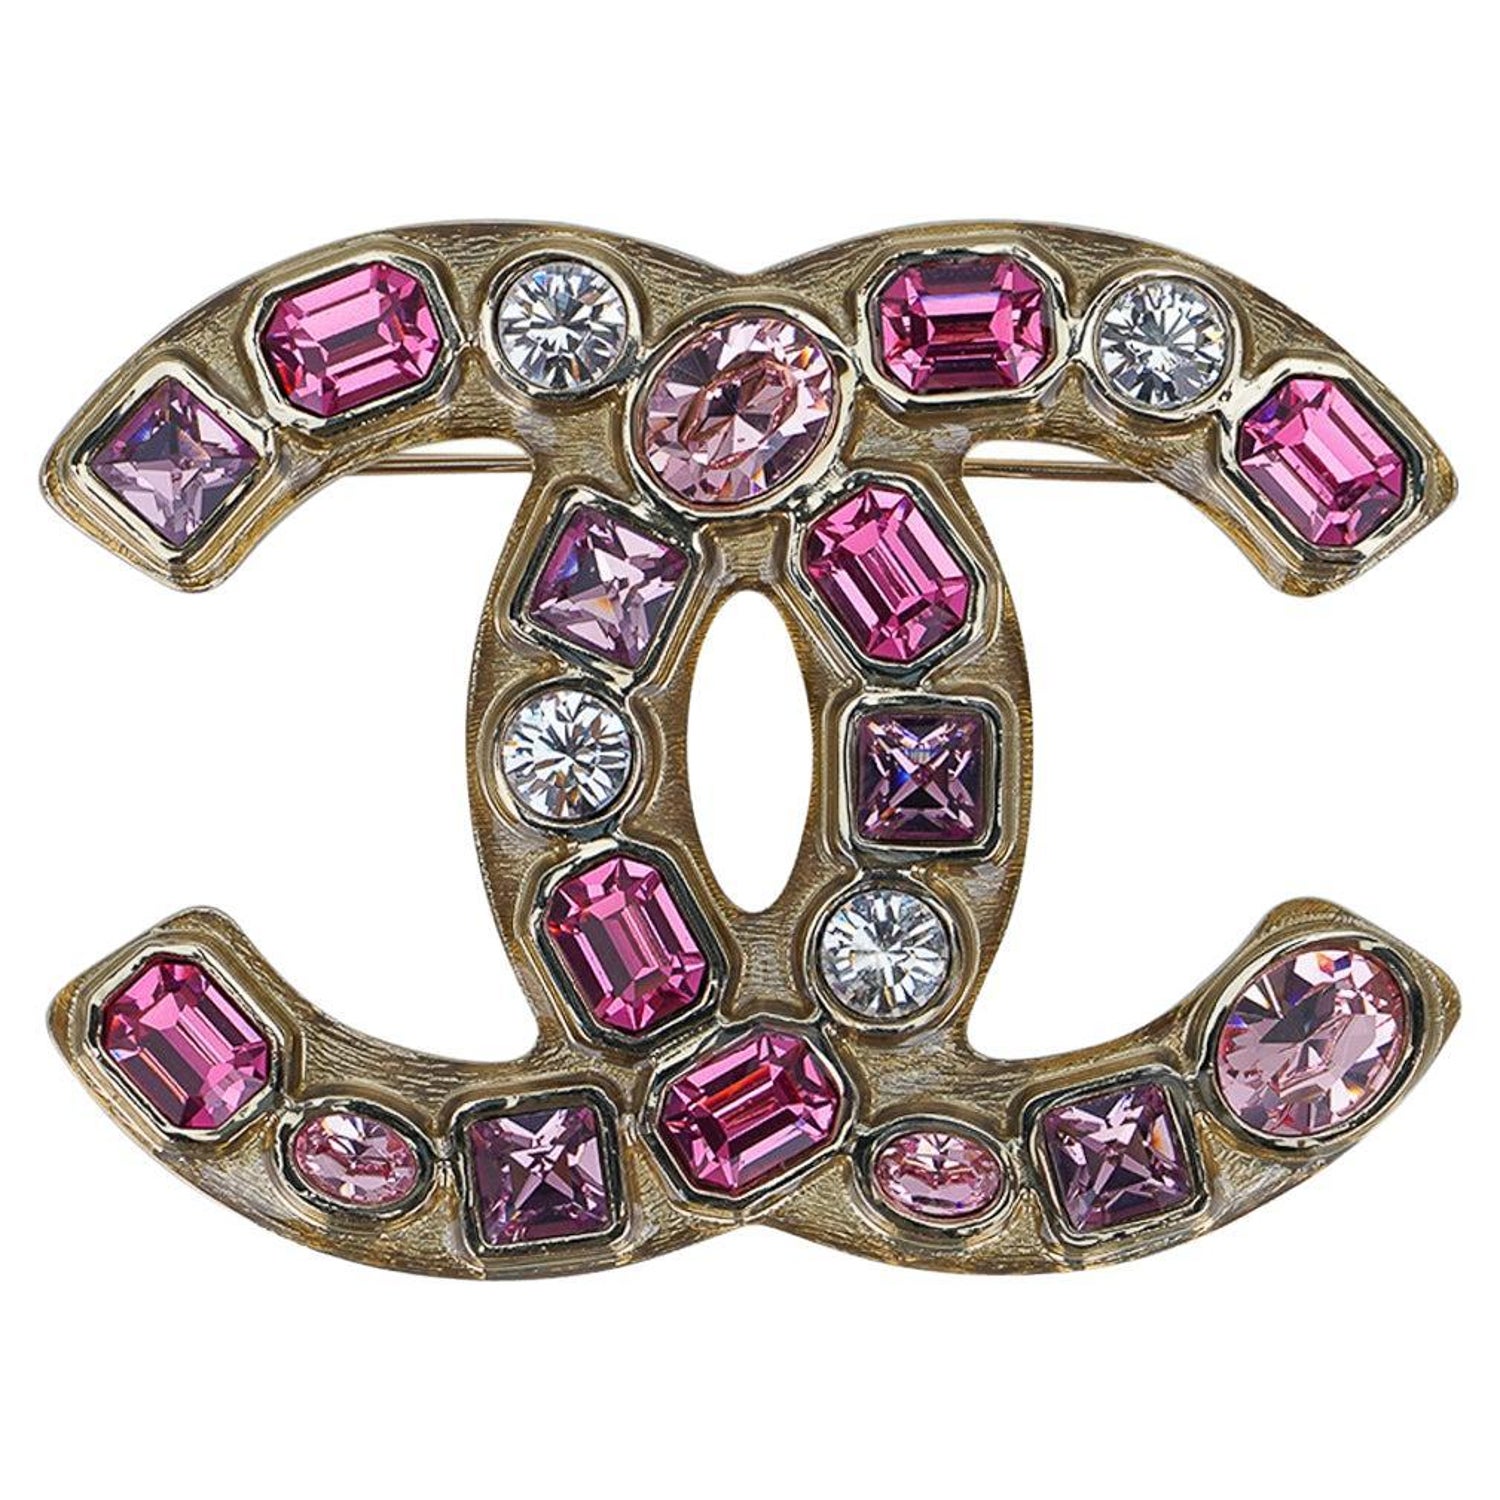 CHANEL, Jewelry, Rare Chanel Butterfly 5p 215 Spring Brooch Euc  Collectors Piece